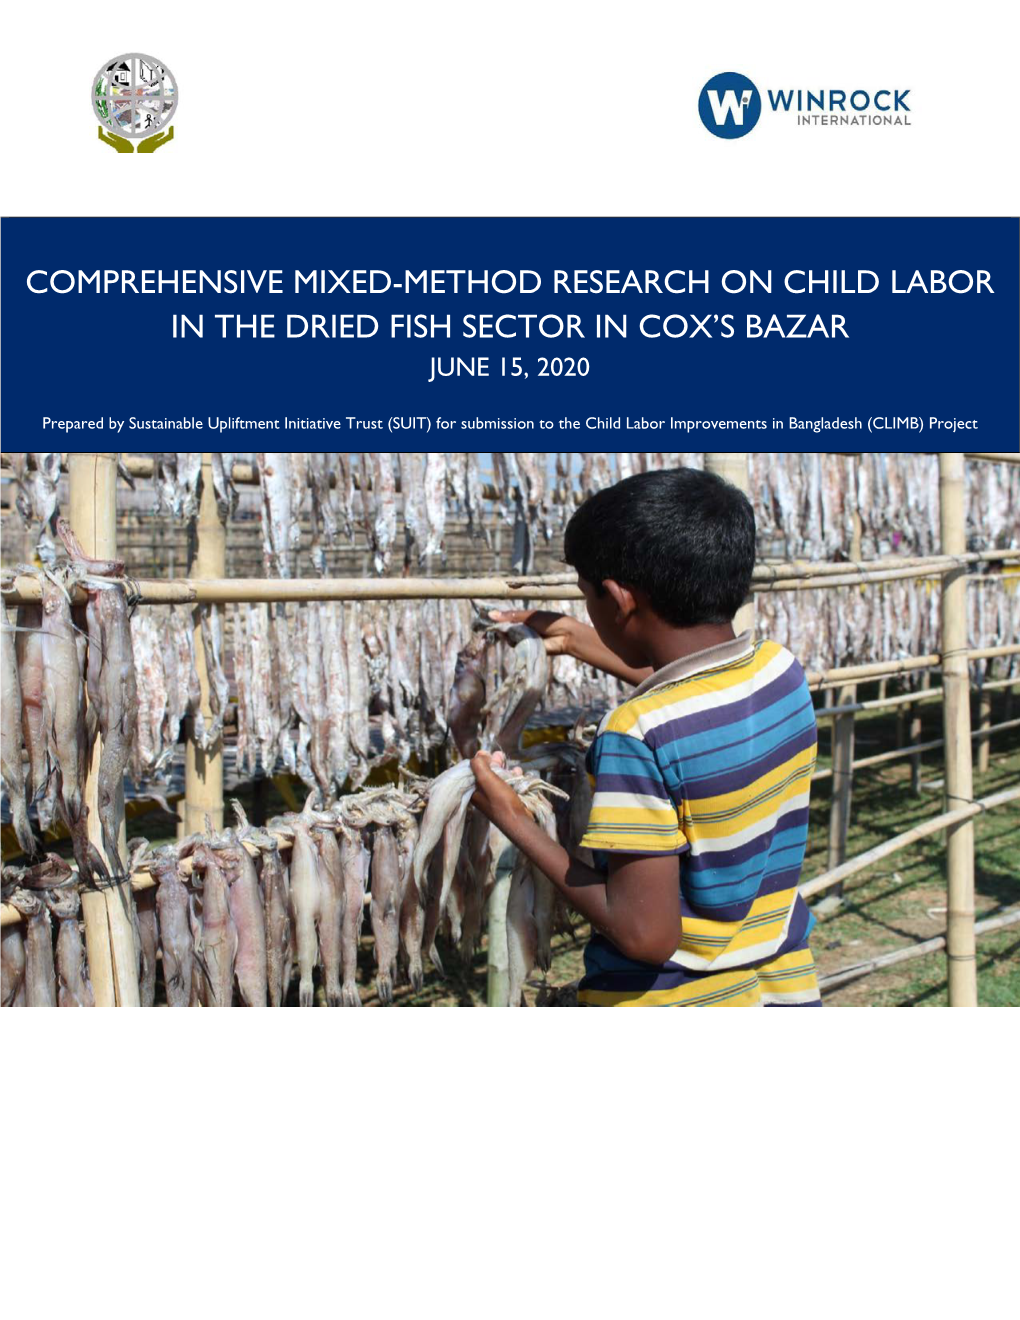 Comprehensive Mixed-Method Research on Child Labor in the Dried Fish Sector in Cox's Bazar